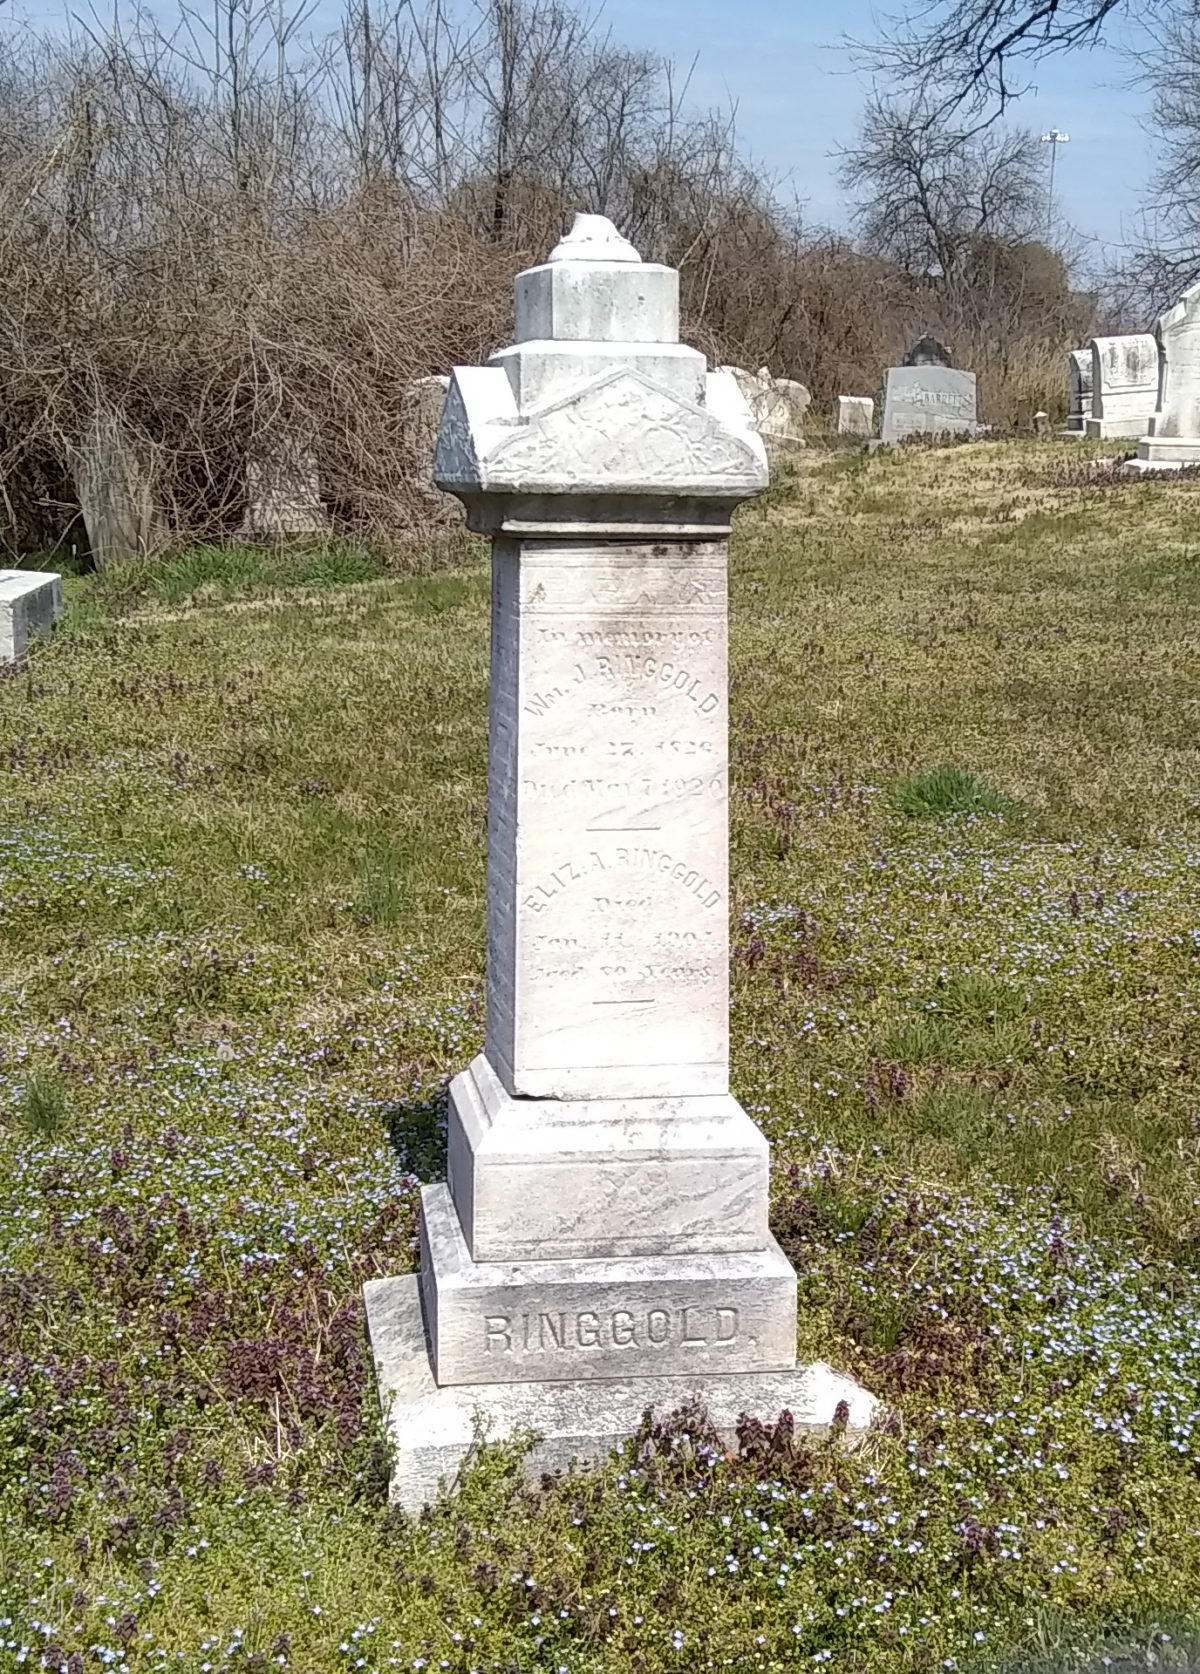 Ringgold monument